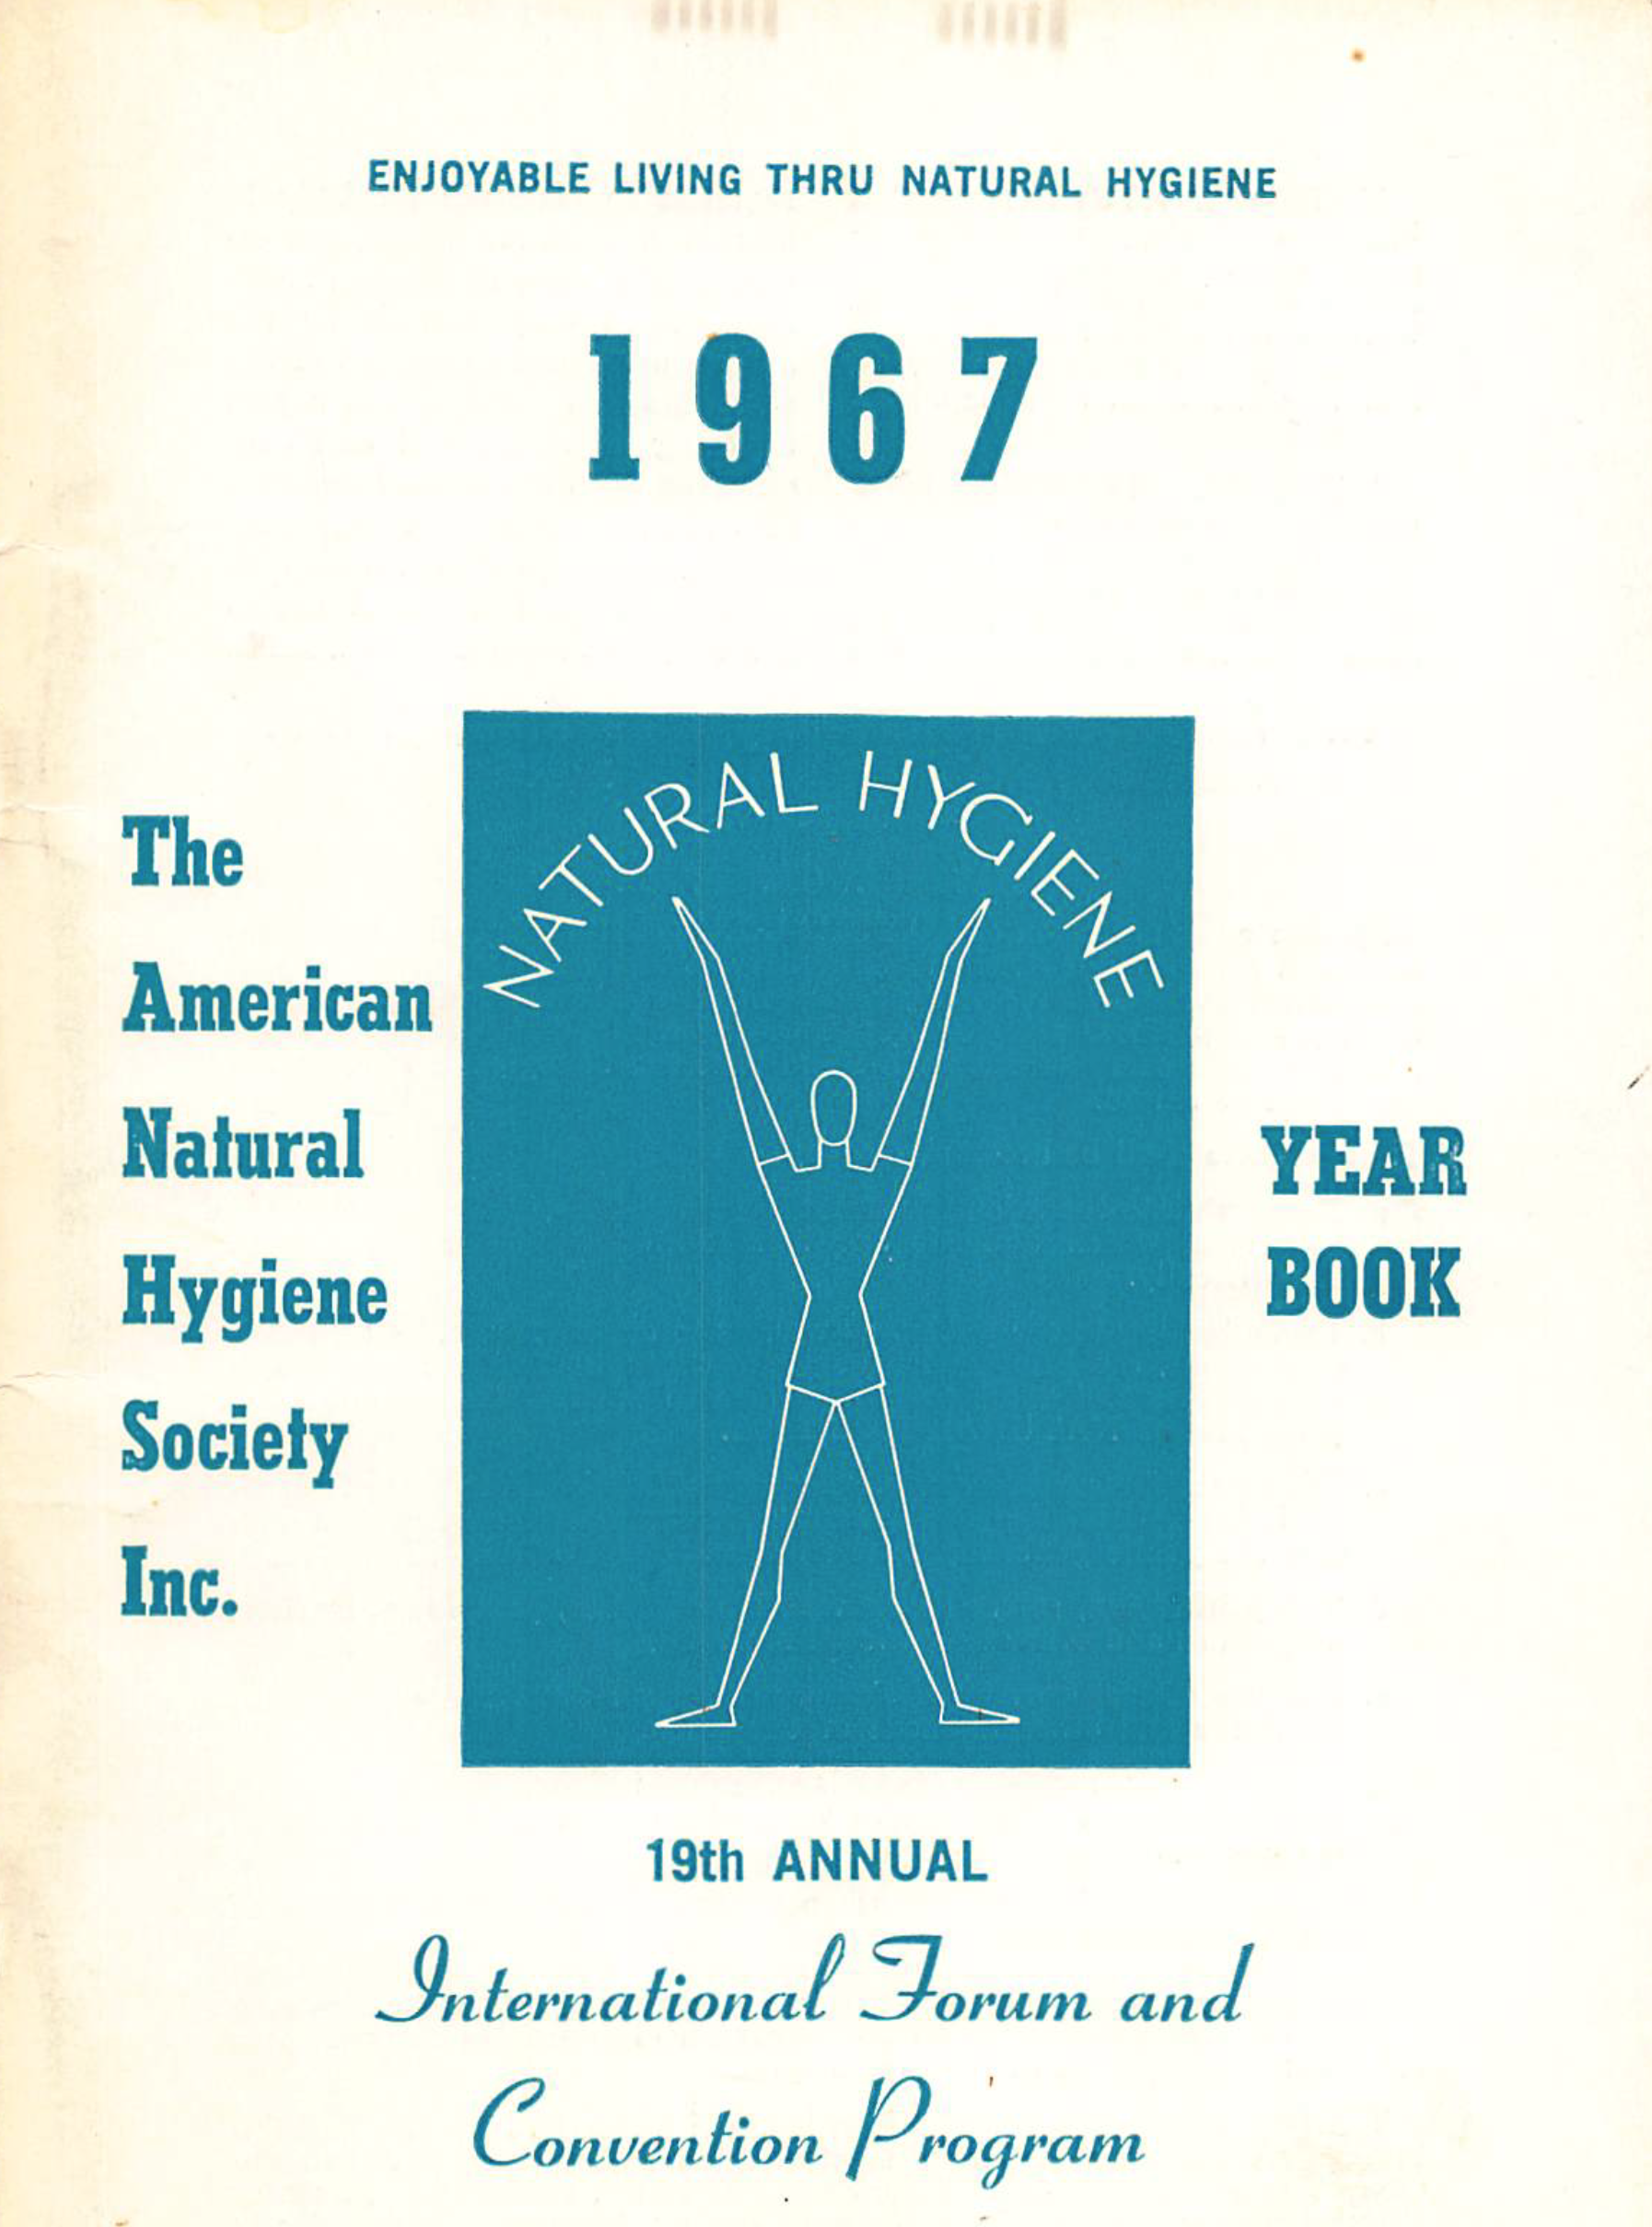 Conference Programs. Chicago, 1967